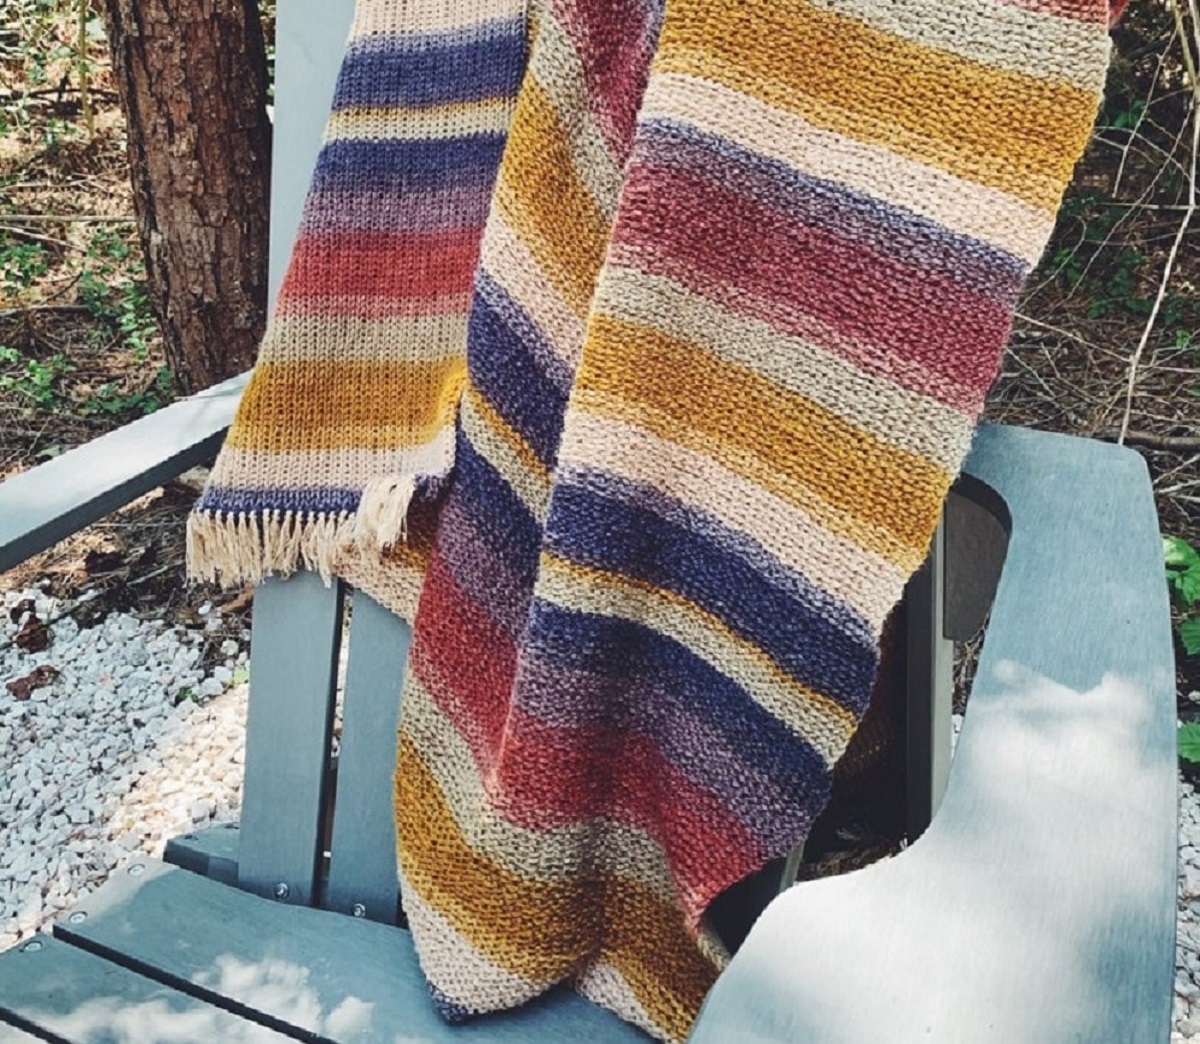 A white, yellow, blue, purple, and pink horizontal striped crochet Afghan hanging over a blue chair and some snow.